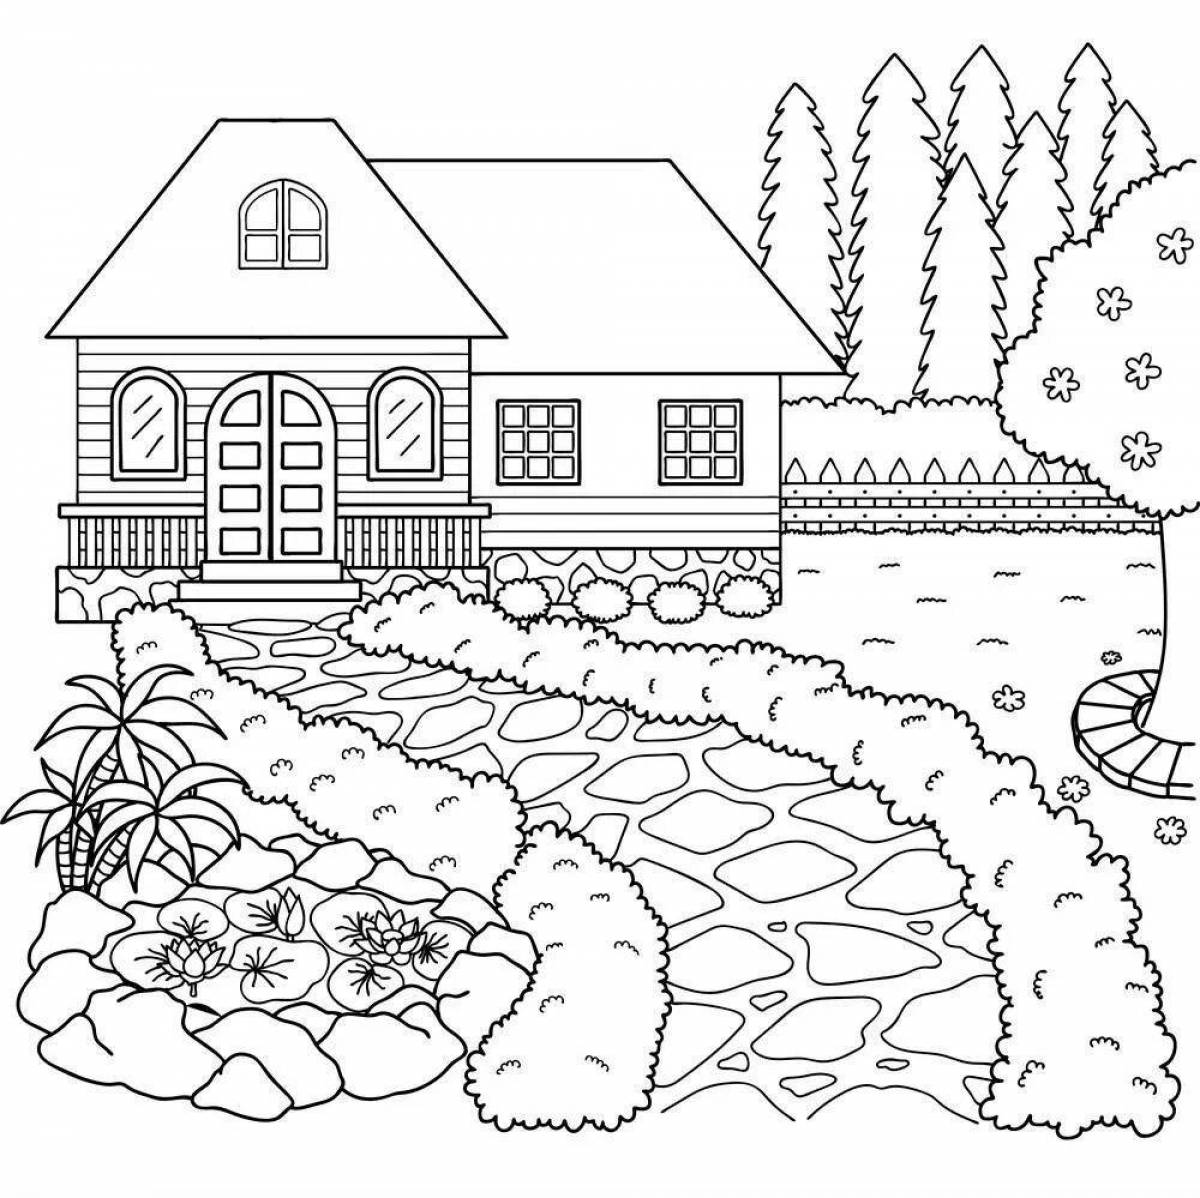 Coloring live country house